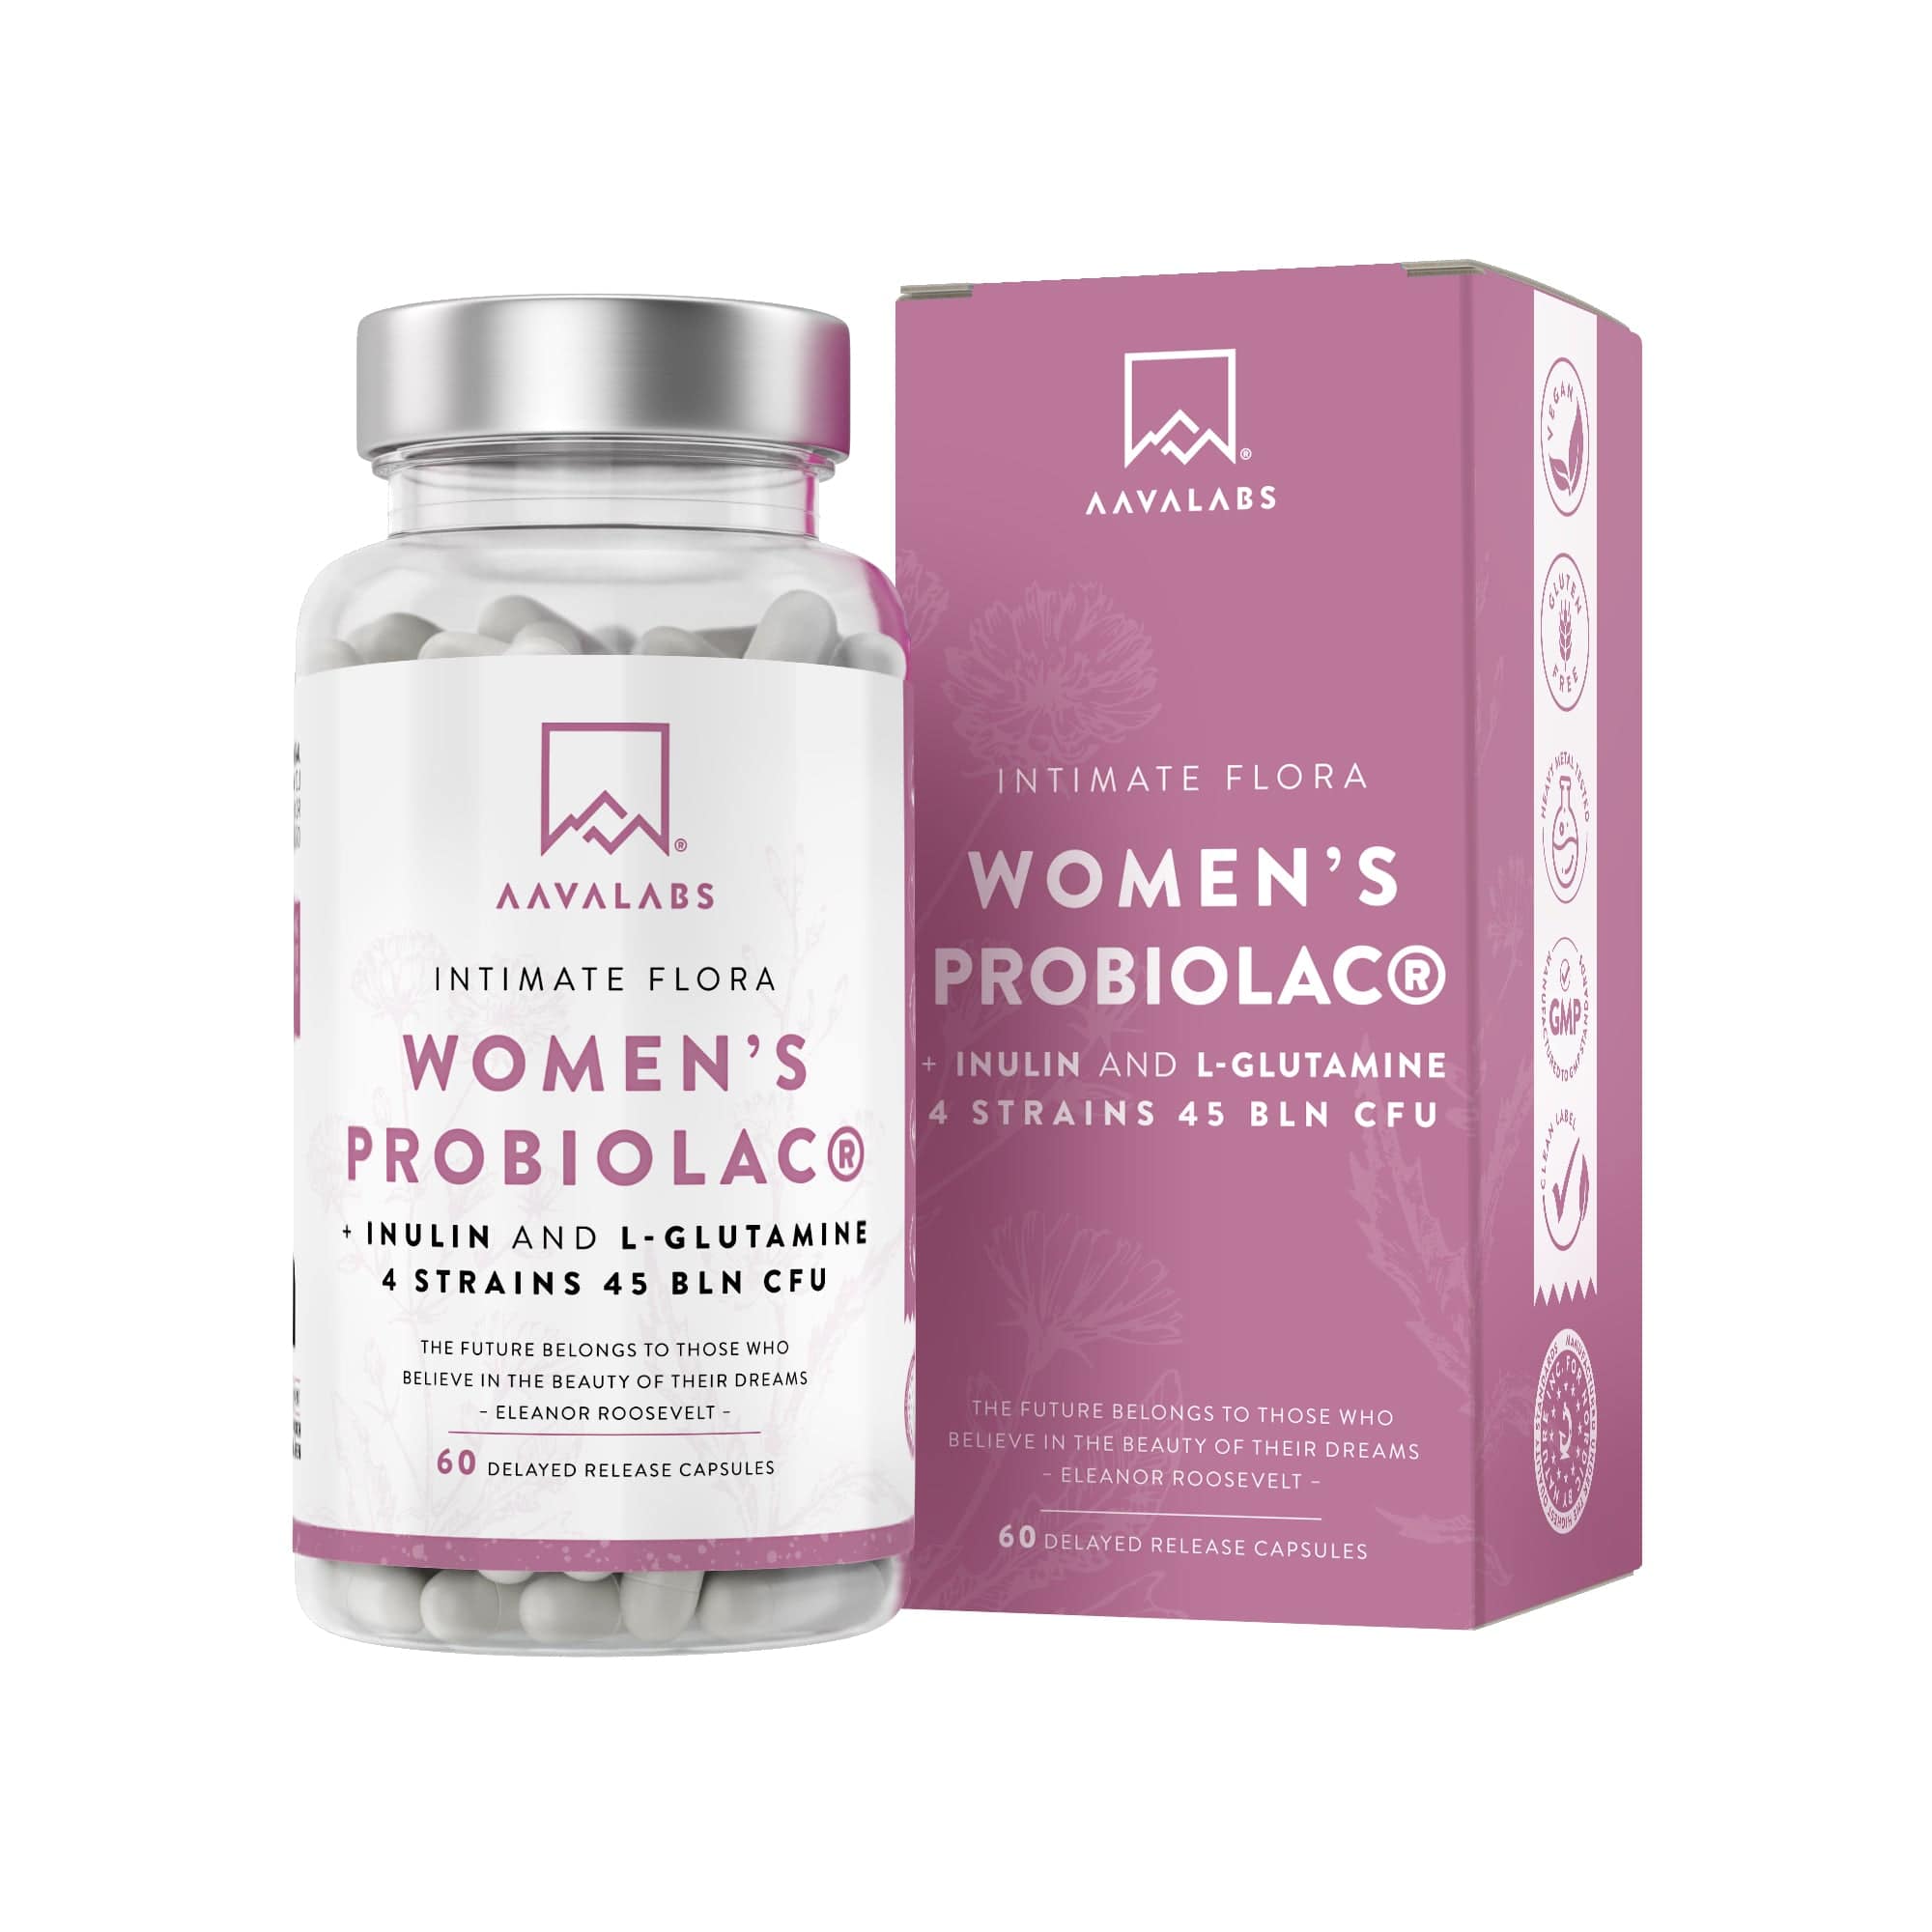 Bottle of Women's Probiolac Probiotic with box Bottle of Women's Probiolac Probiotic  - AAVALABS